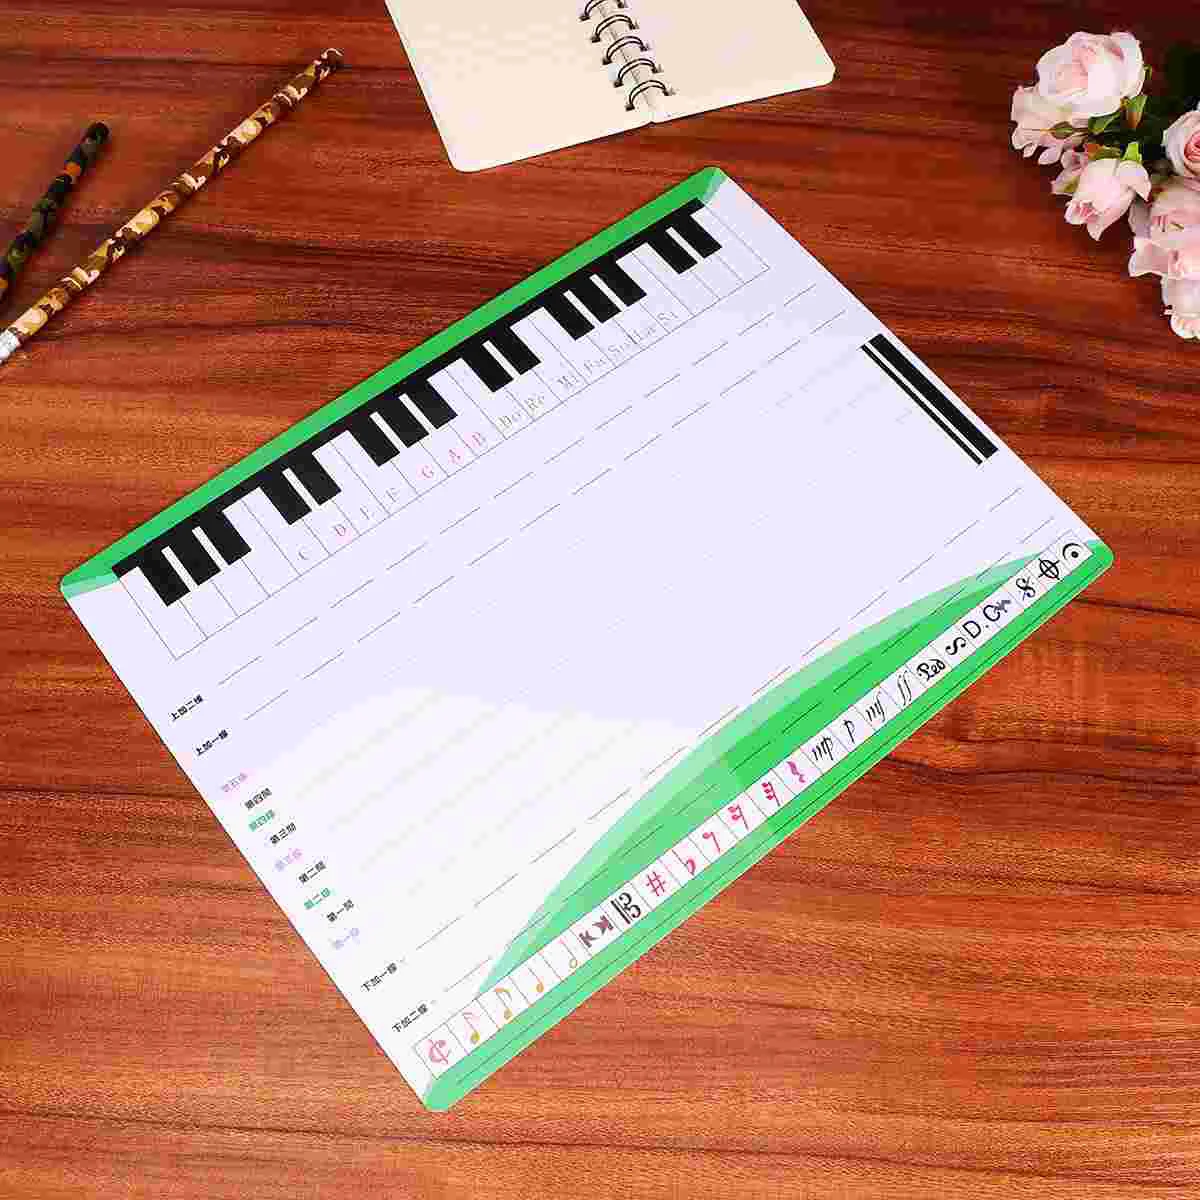 

Musical Notes Boards Dry Erase Staff Music Lap White Board Piano Finger Simulation Practice Guide Teaching Aid Note Chart